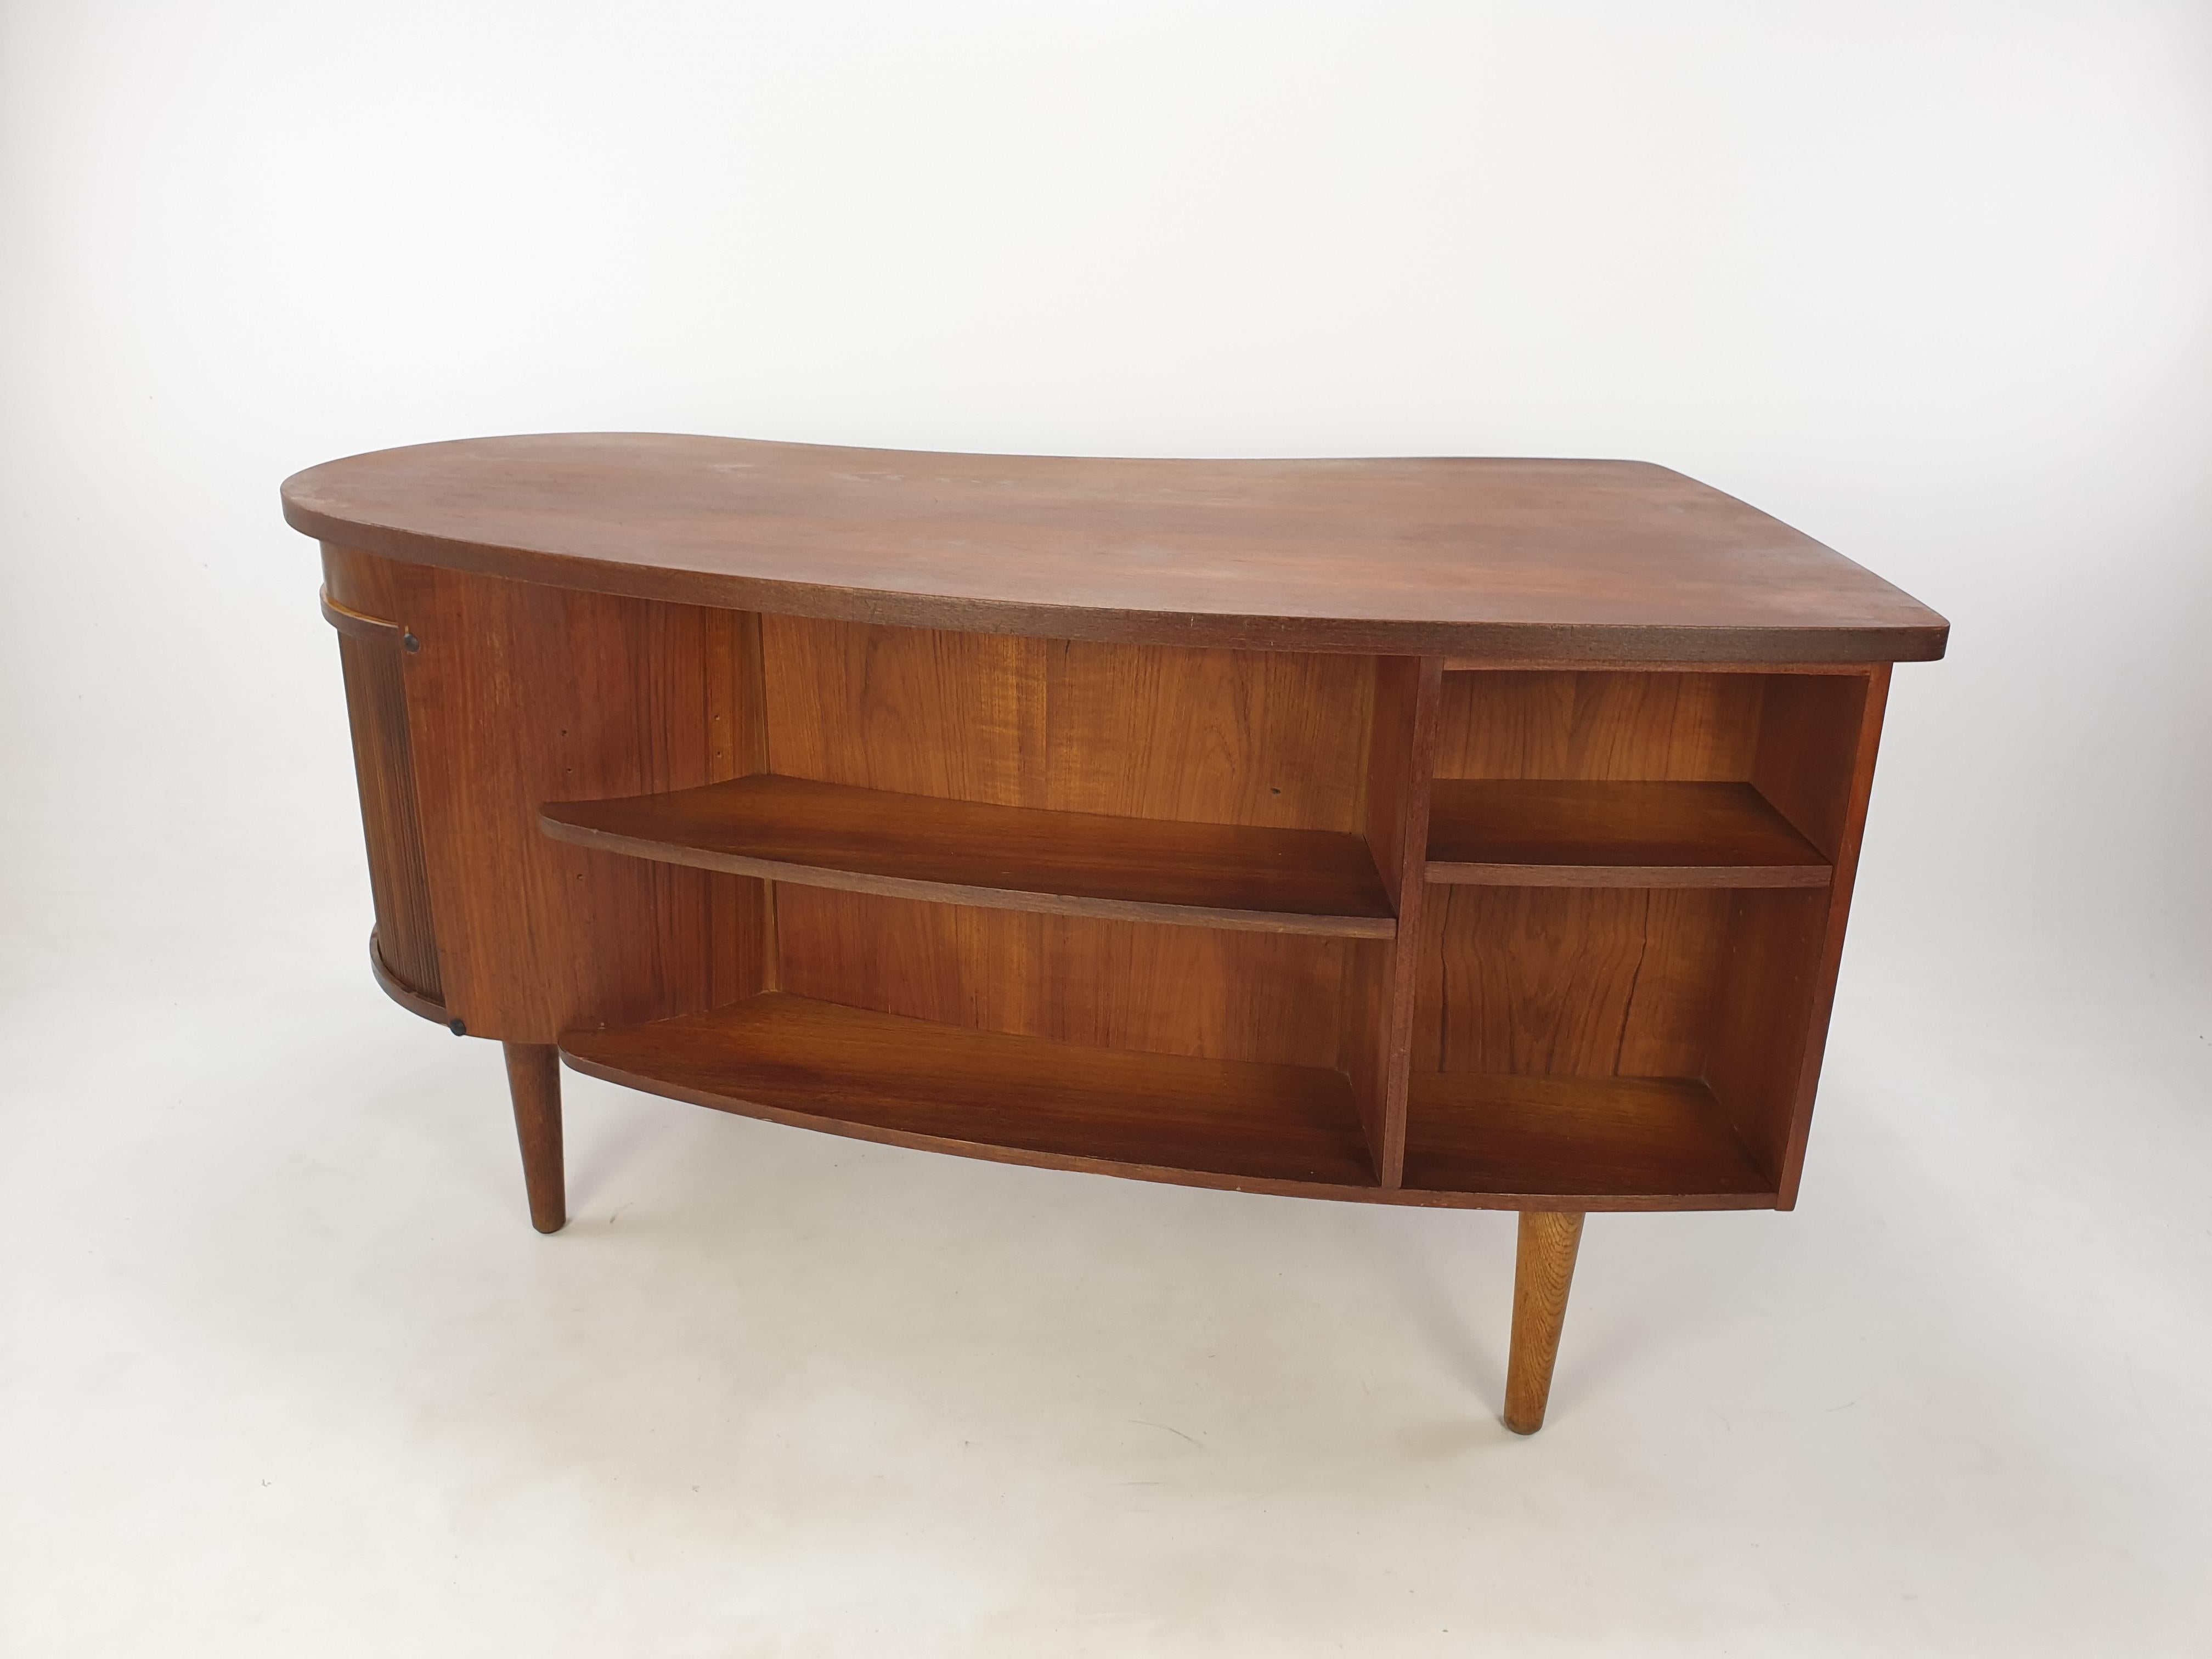 Beautiful mid century Danish desk with a lovely shaped top. Designed by Kai Kristiansen and fabricated by Feldballes Møbelfabrik in the 50's.

A cute circular storage section with a roll sliding door, inside a turning bar with etched